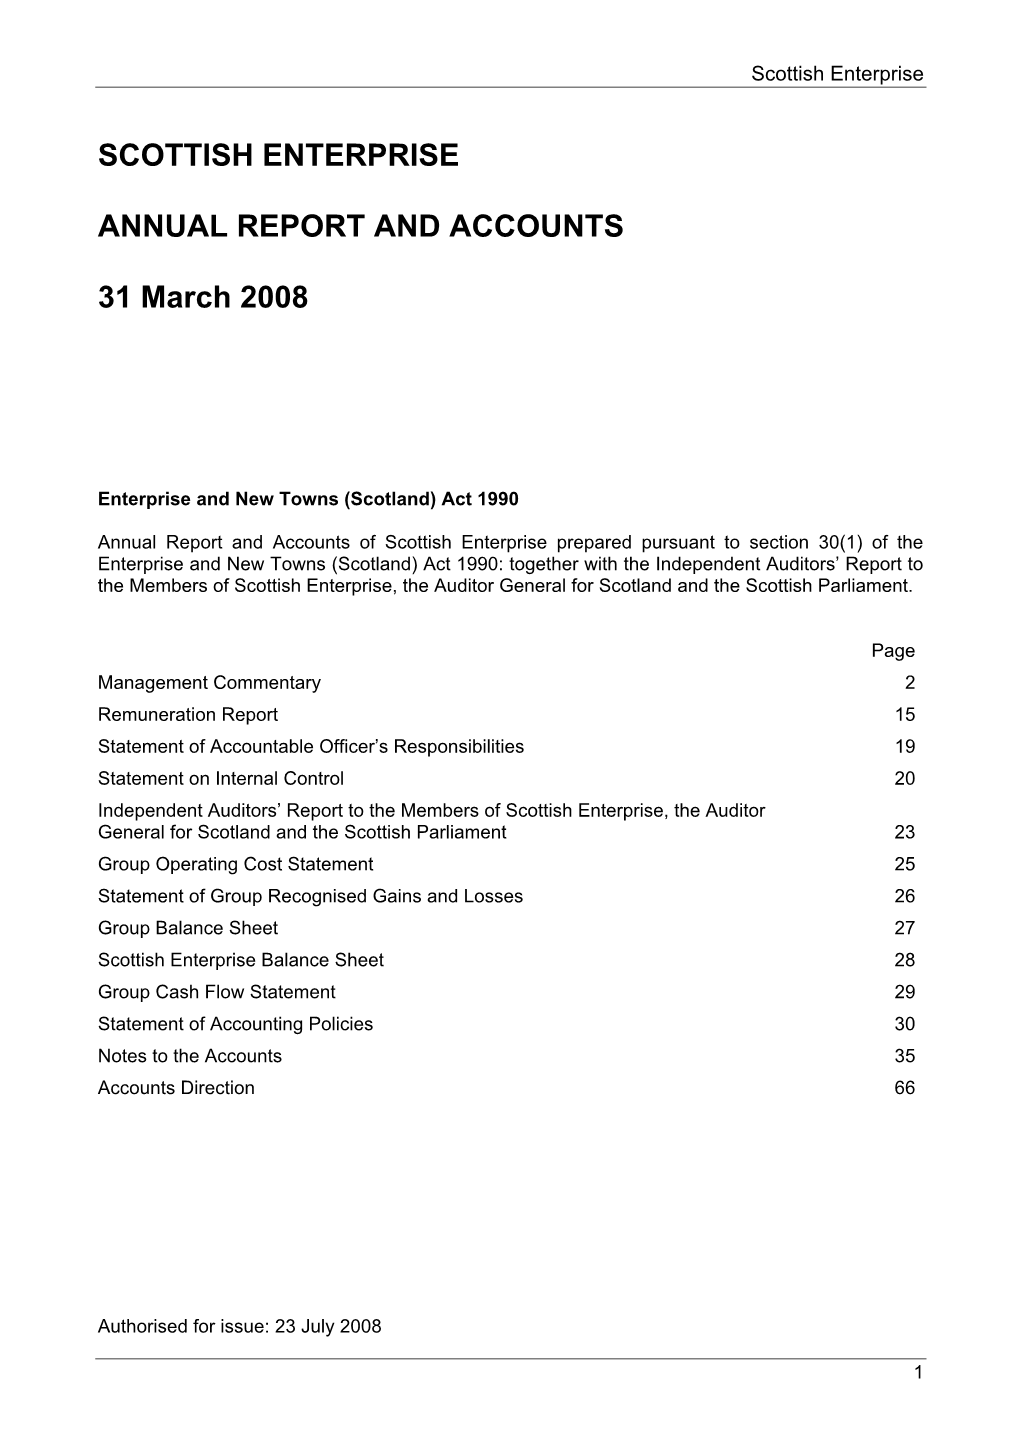 Scottish Enterprise Annual Report and Accounts, 31 March 2008